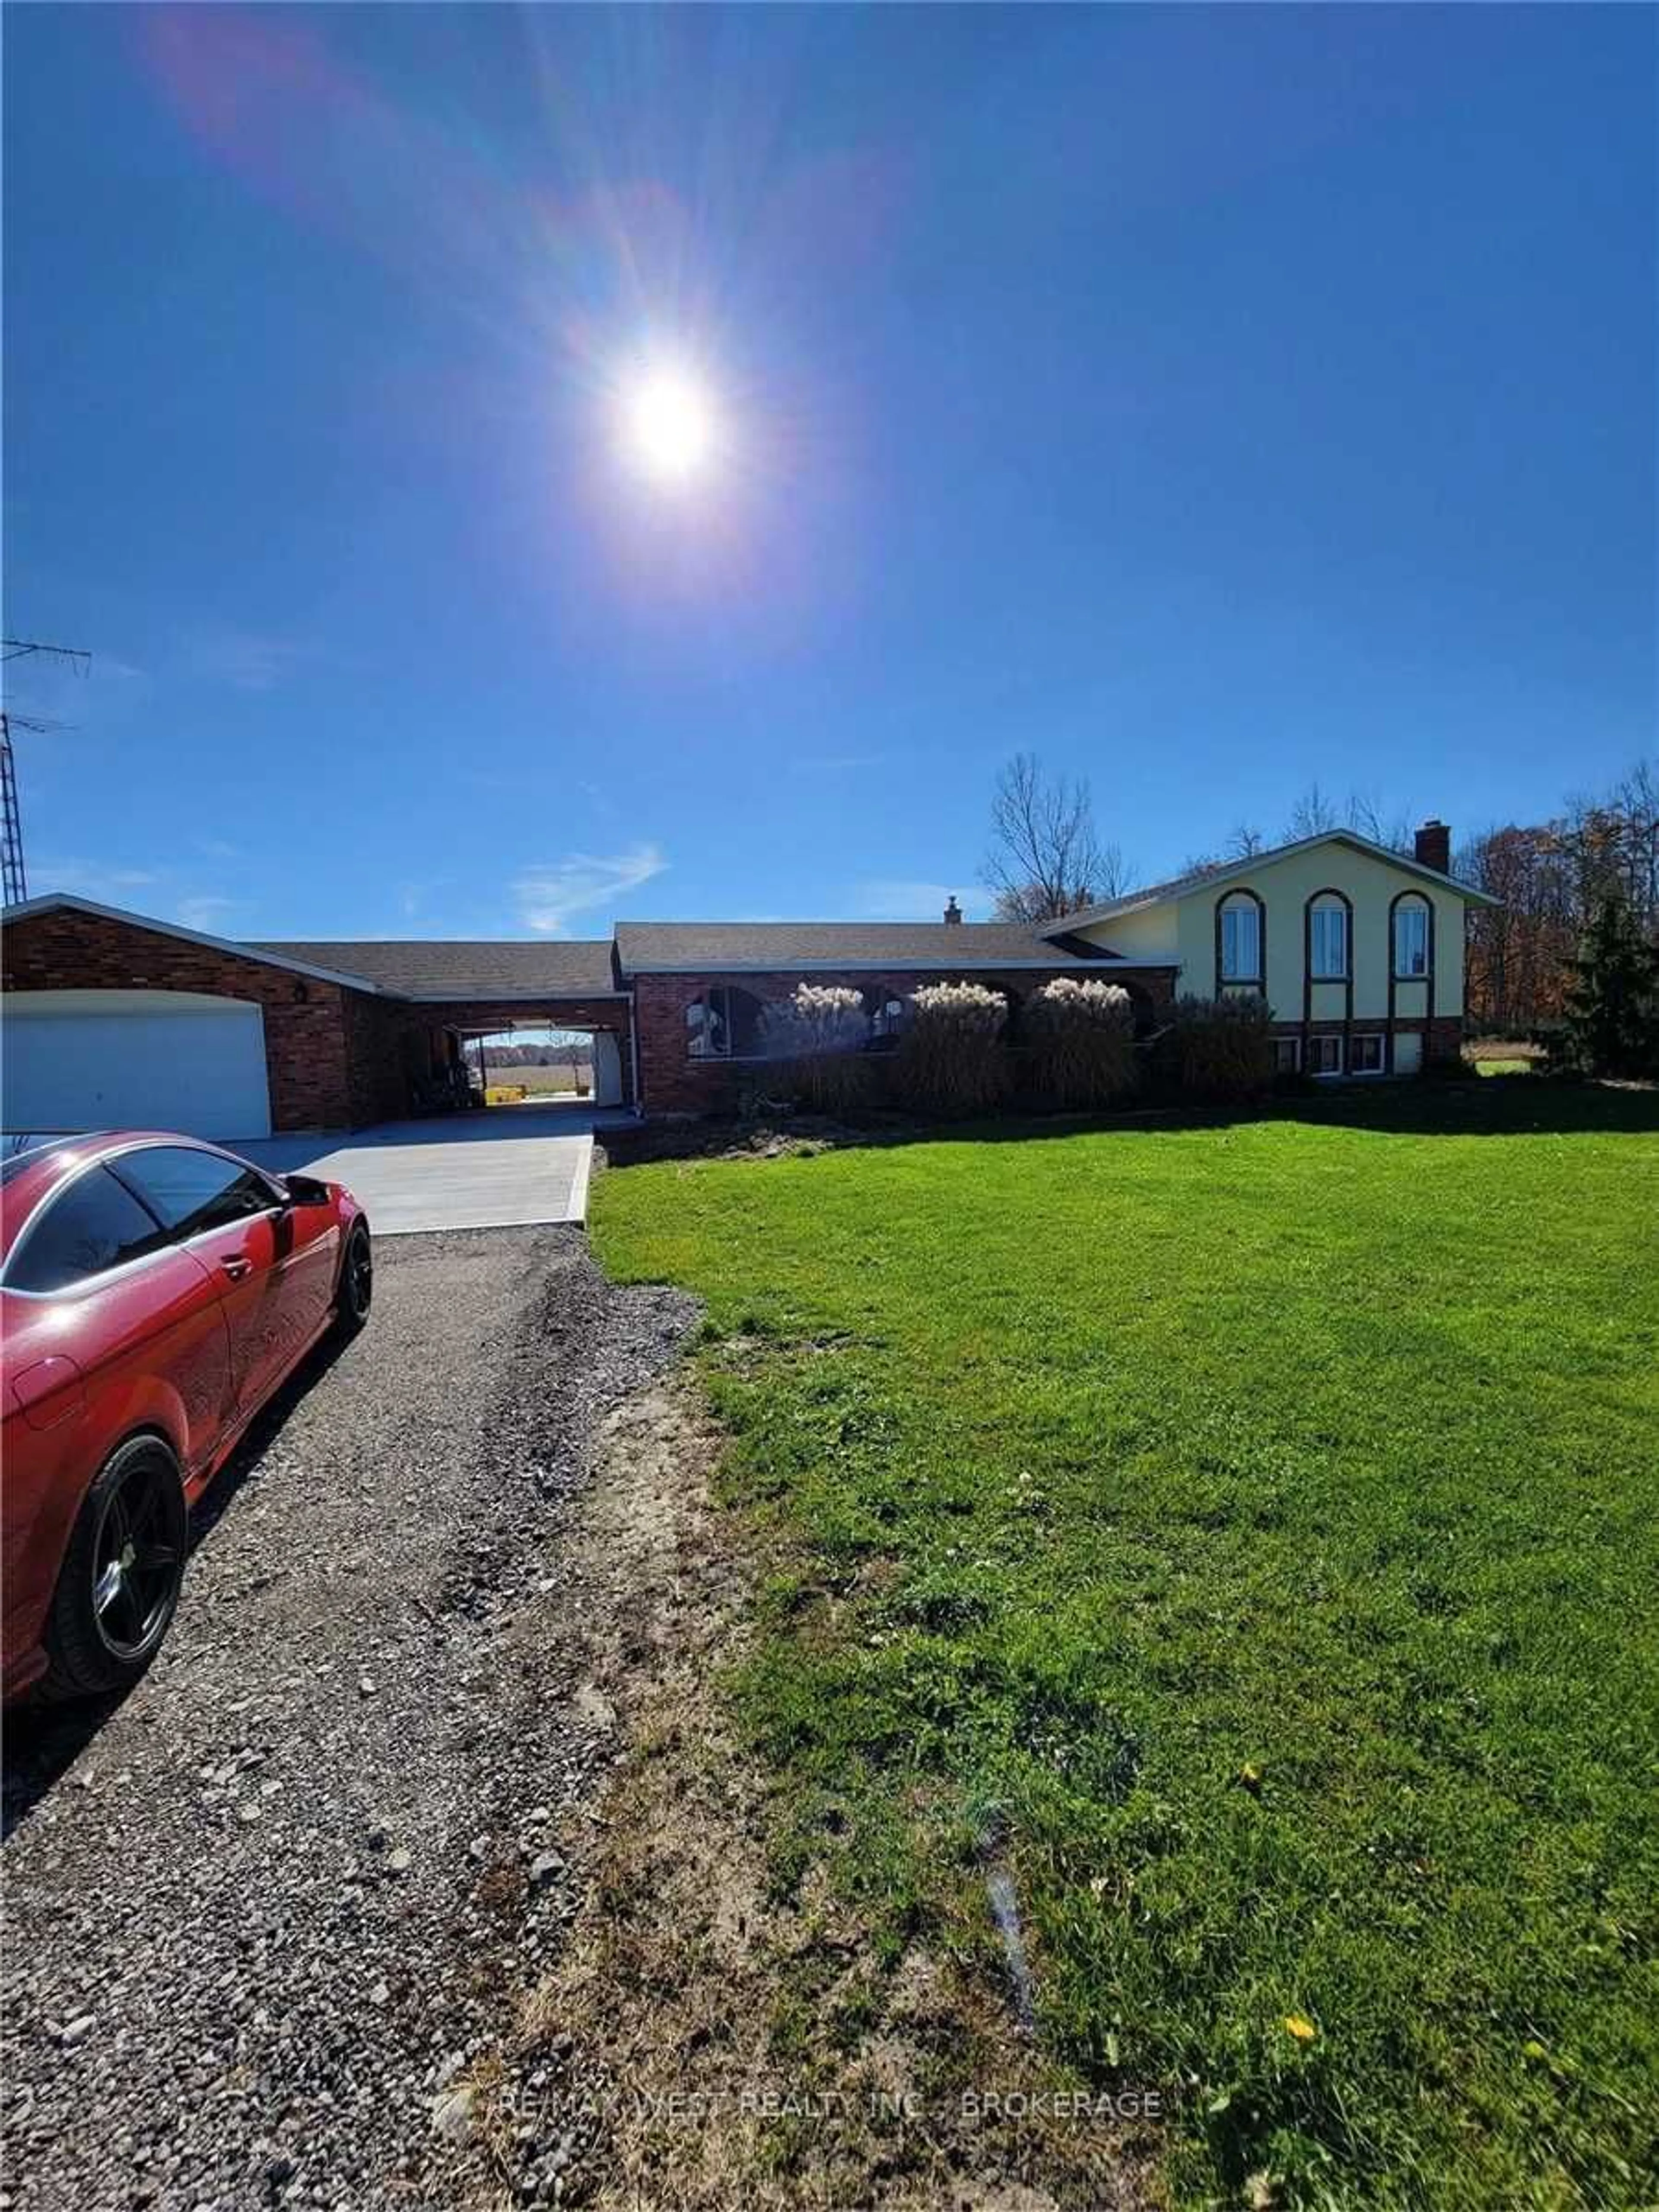 Frontside or backside of a home for 52161 Willford Rd, Wainfleet Ontario L0S 1V0